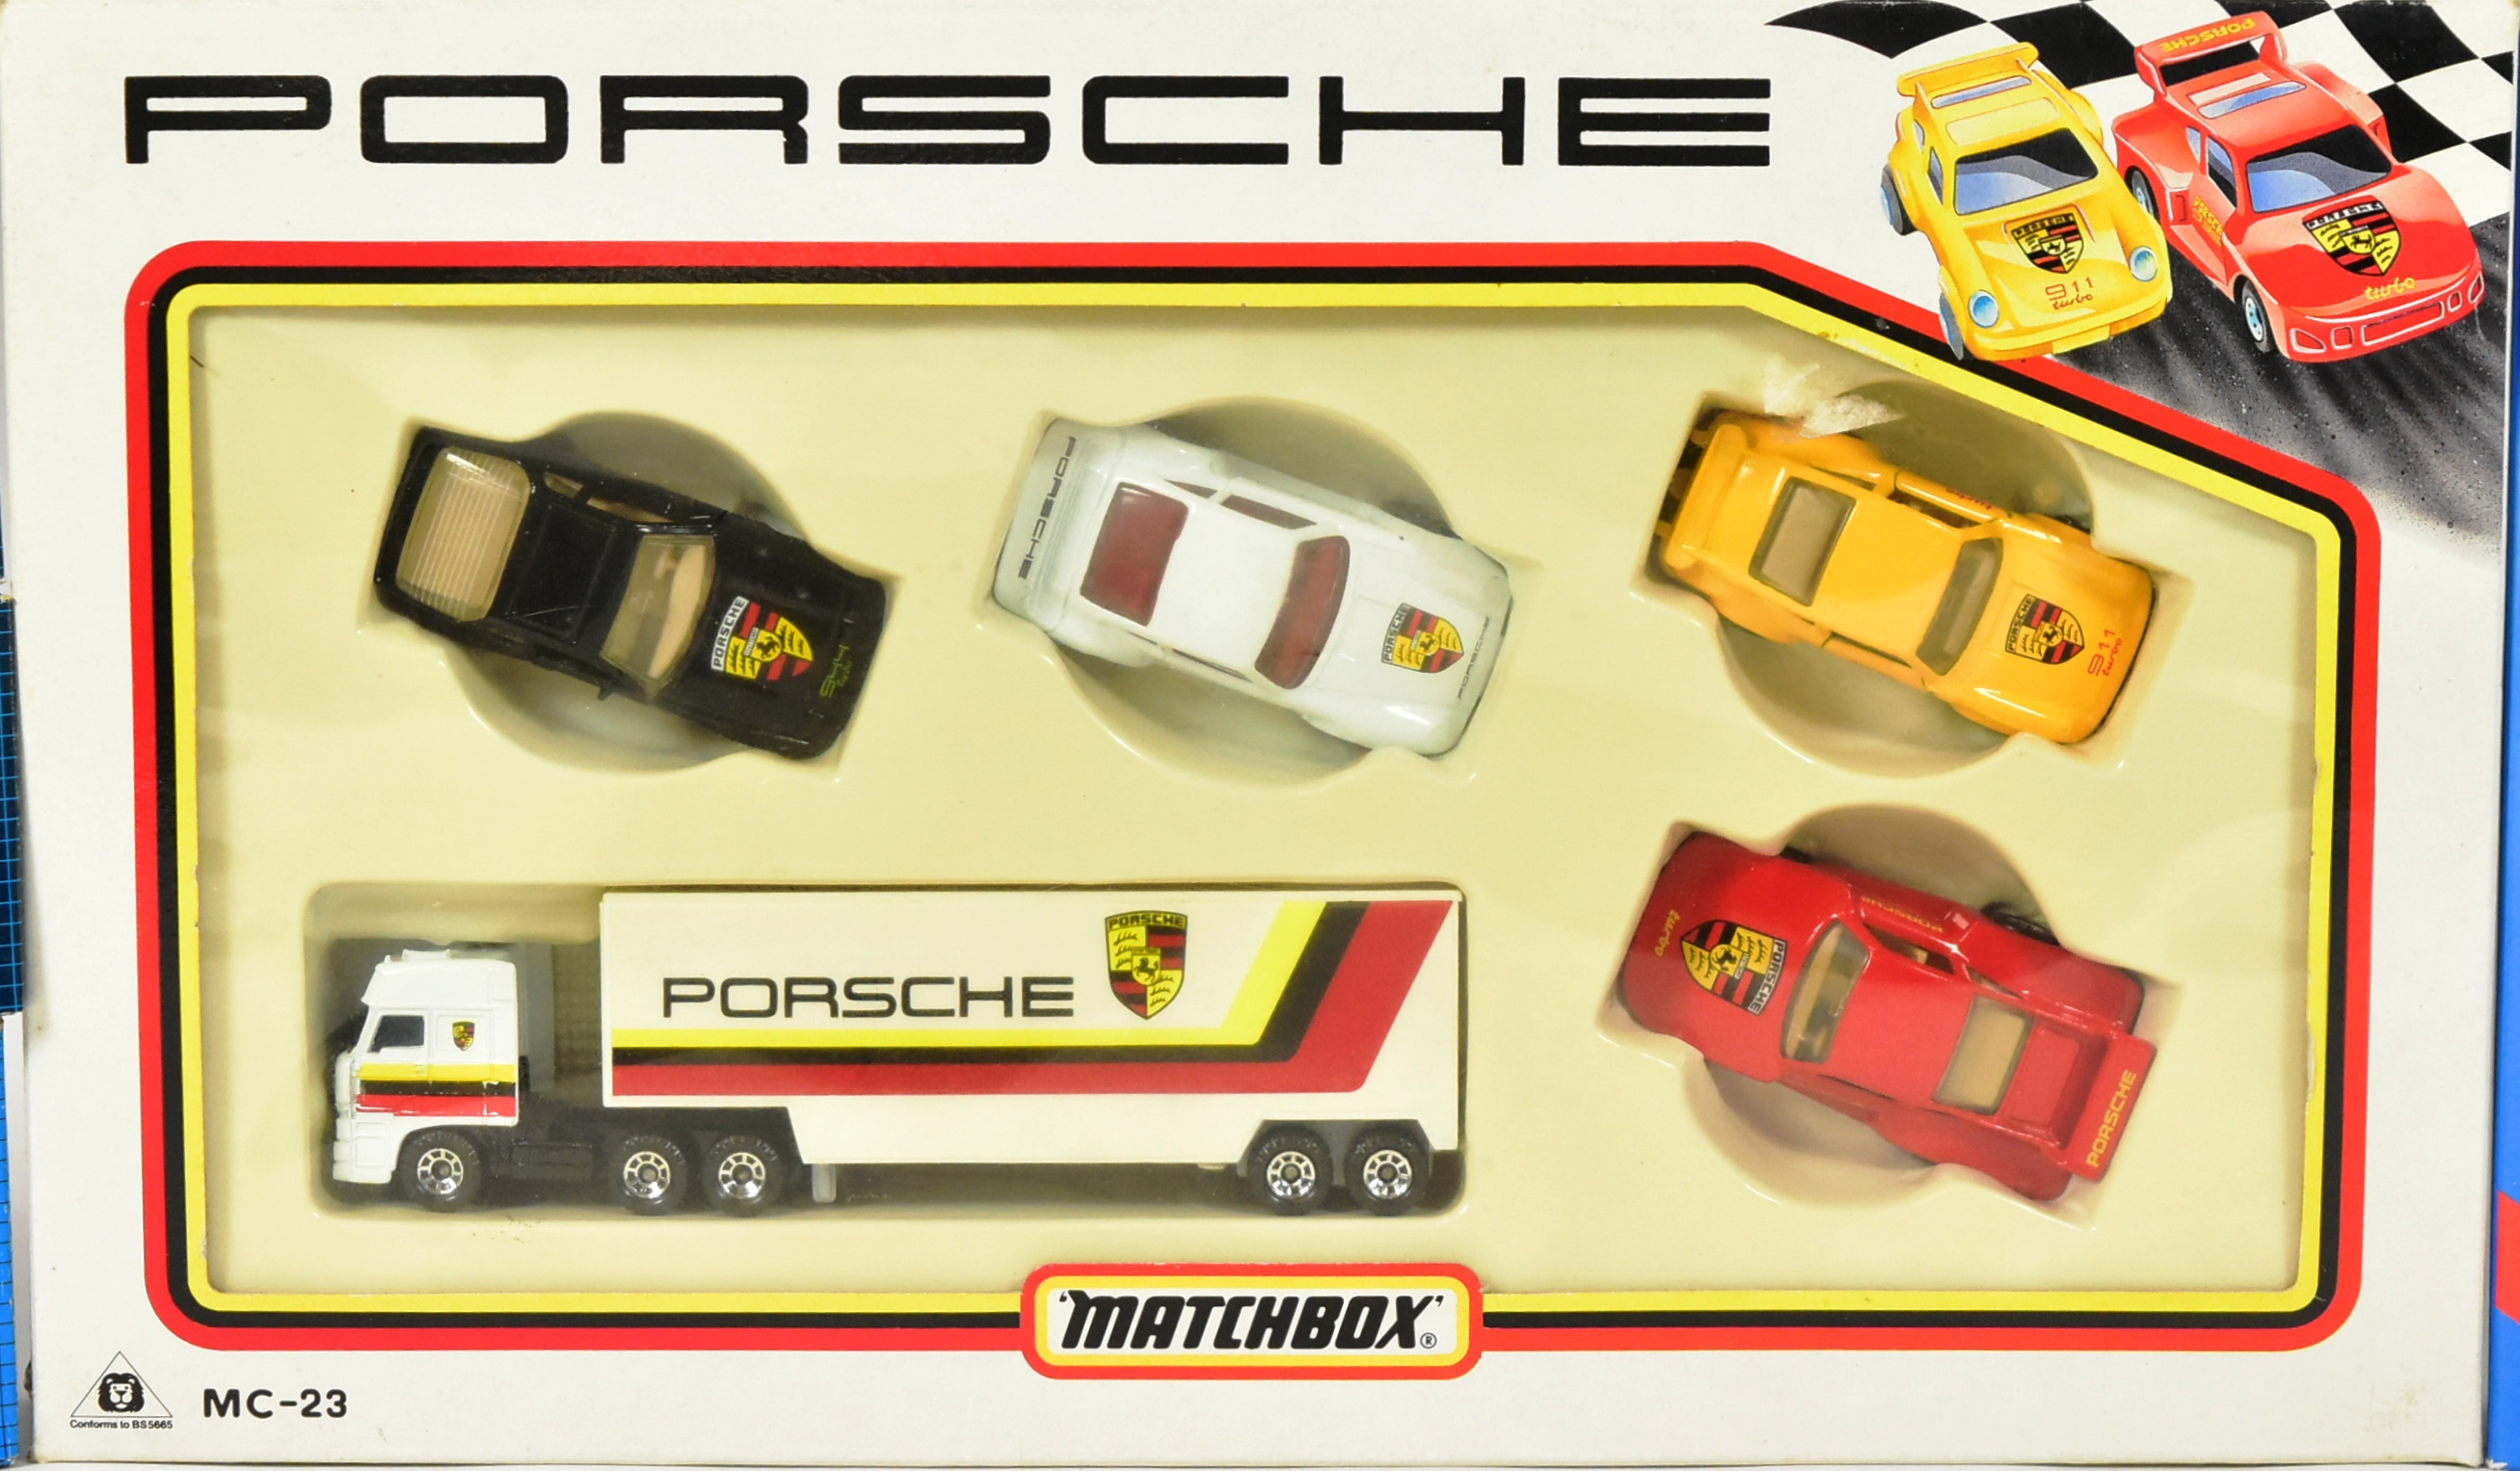 DIECAST - COLLECTION OF VINTAGE MATCHBOX DIECAST MODELS - Image 3 of 4